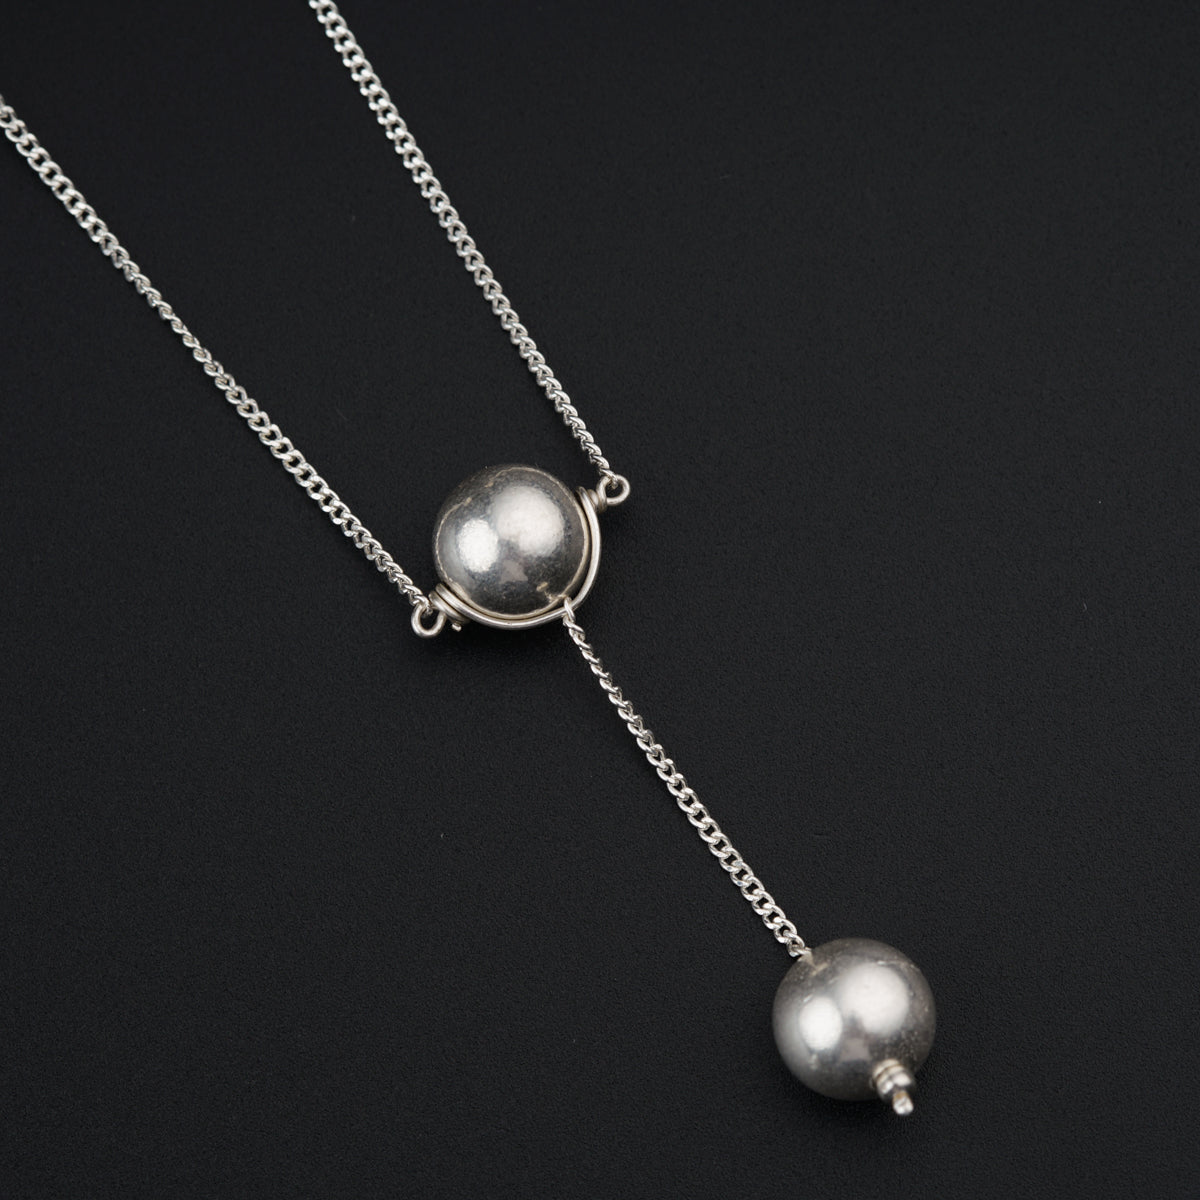 a silver necklace with two balls hanging from it